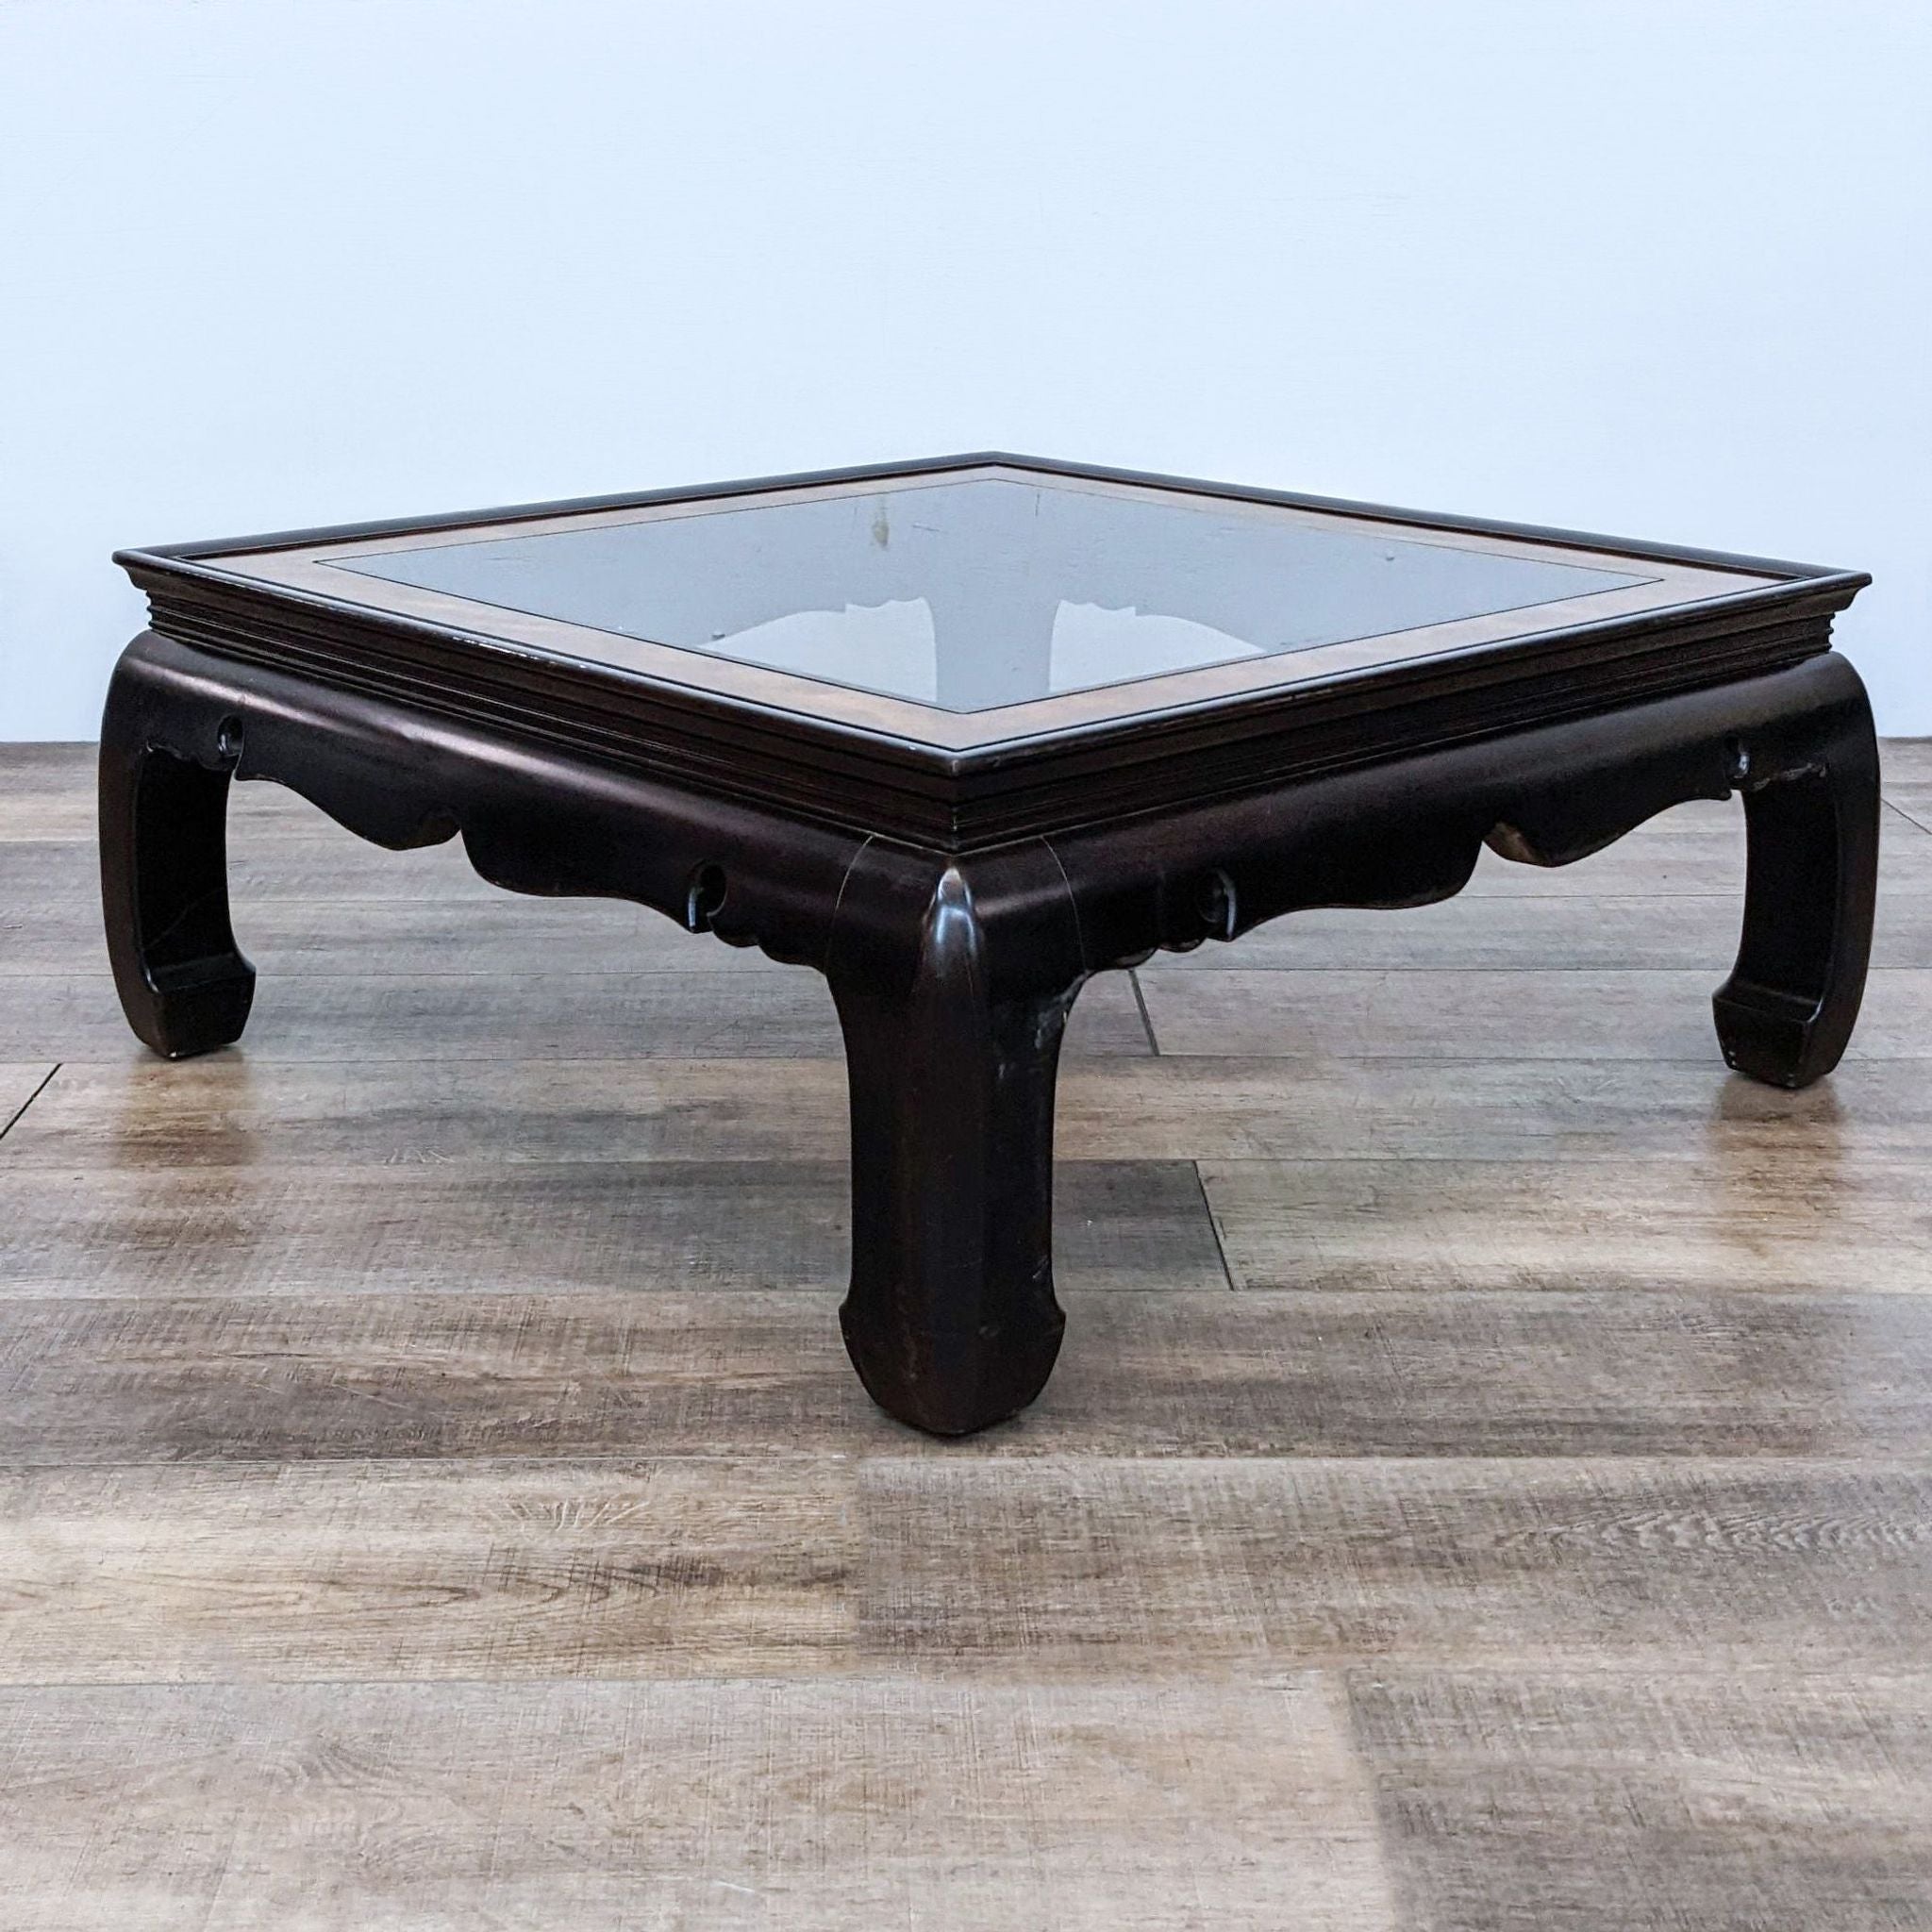 Elegant Reperch burlwood framed coffee table featuring a clear glass top and sturdy legs, positioned on a textured floor.